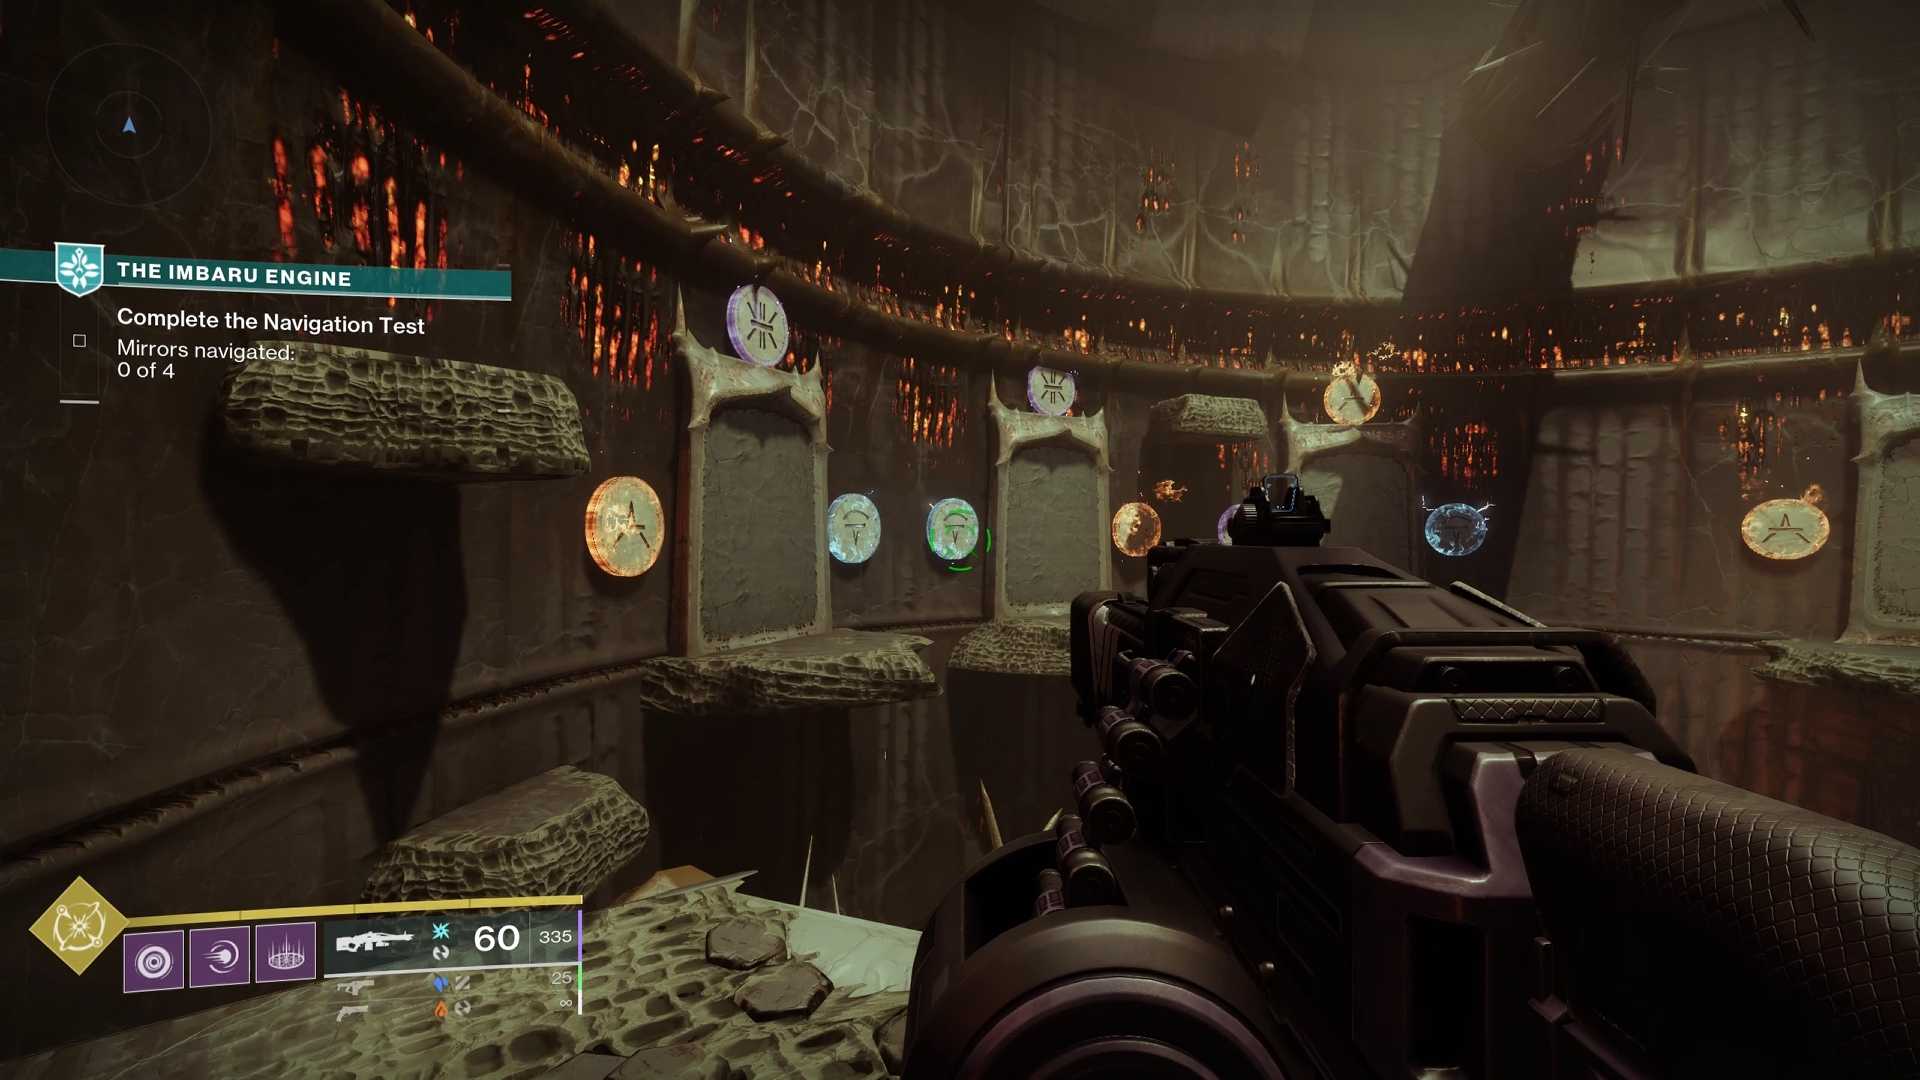 The first rune to shoot to solve The Navigation Test in Destiny 2's The Imbaru Engine.